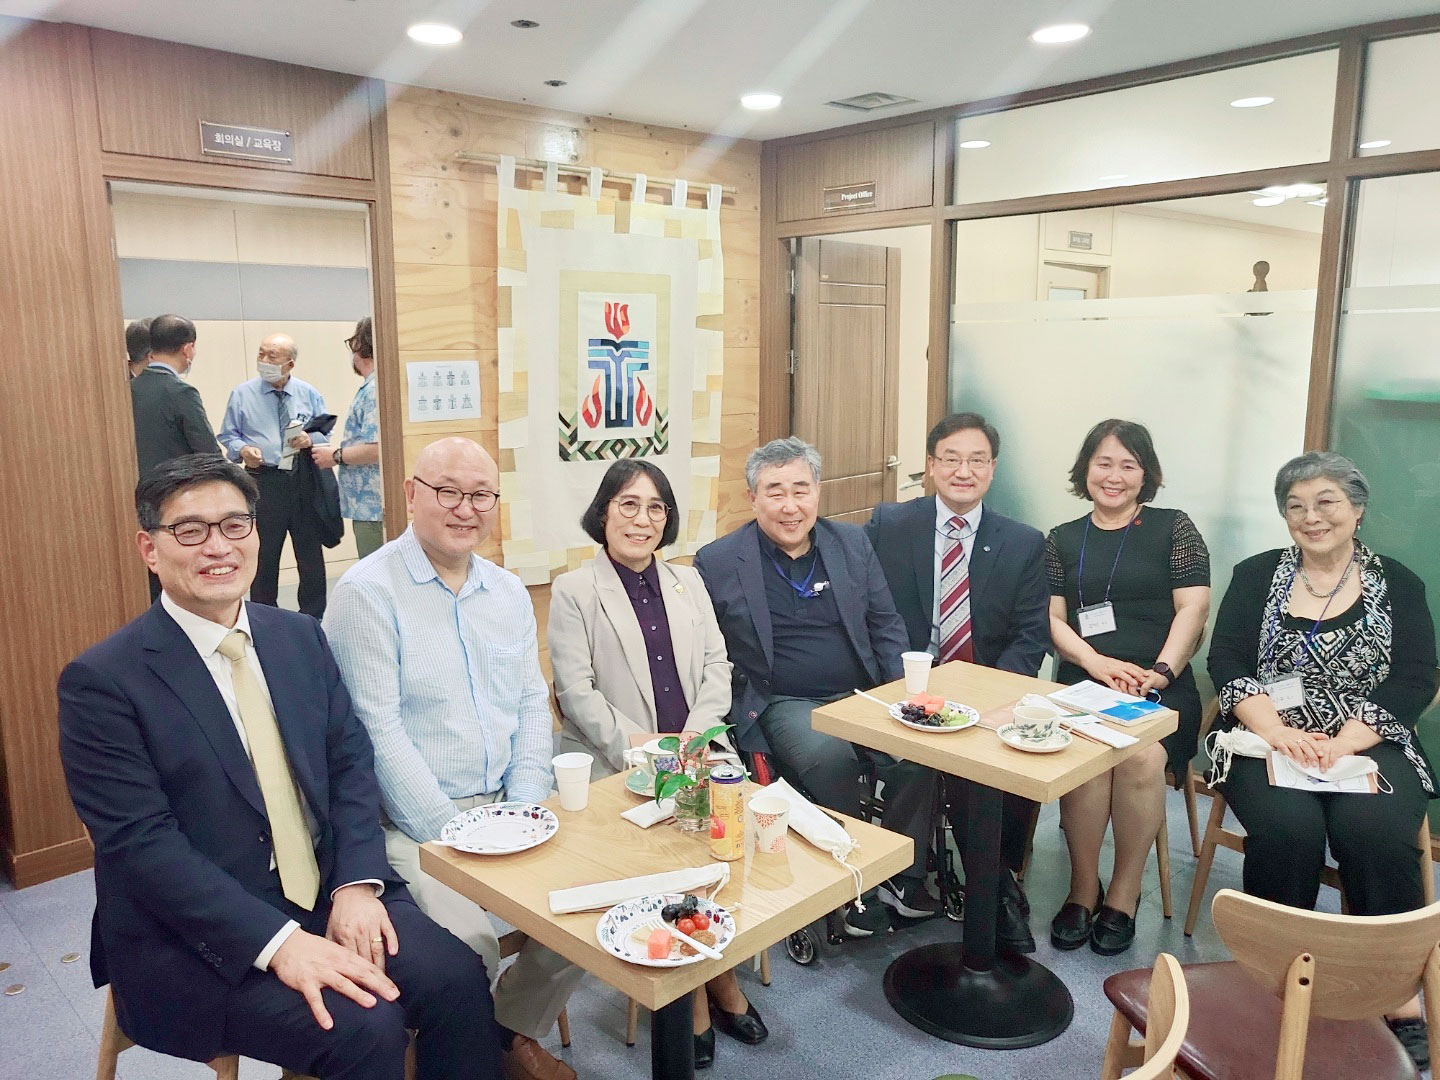 Open House with the general secretaries of PCK and PROK, and the moderator of PROK, who is the third woman from the left. 오픈 하우스(예장 사무총장, 기장 총무 및 총회장과 함께. 기장 총회장은 왼쪽에서 세번째 여성).